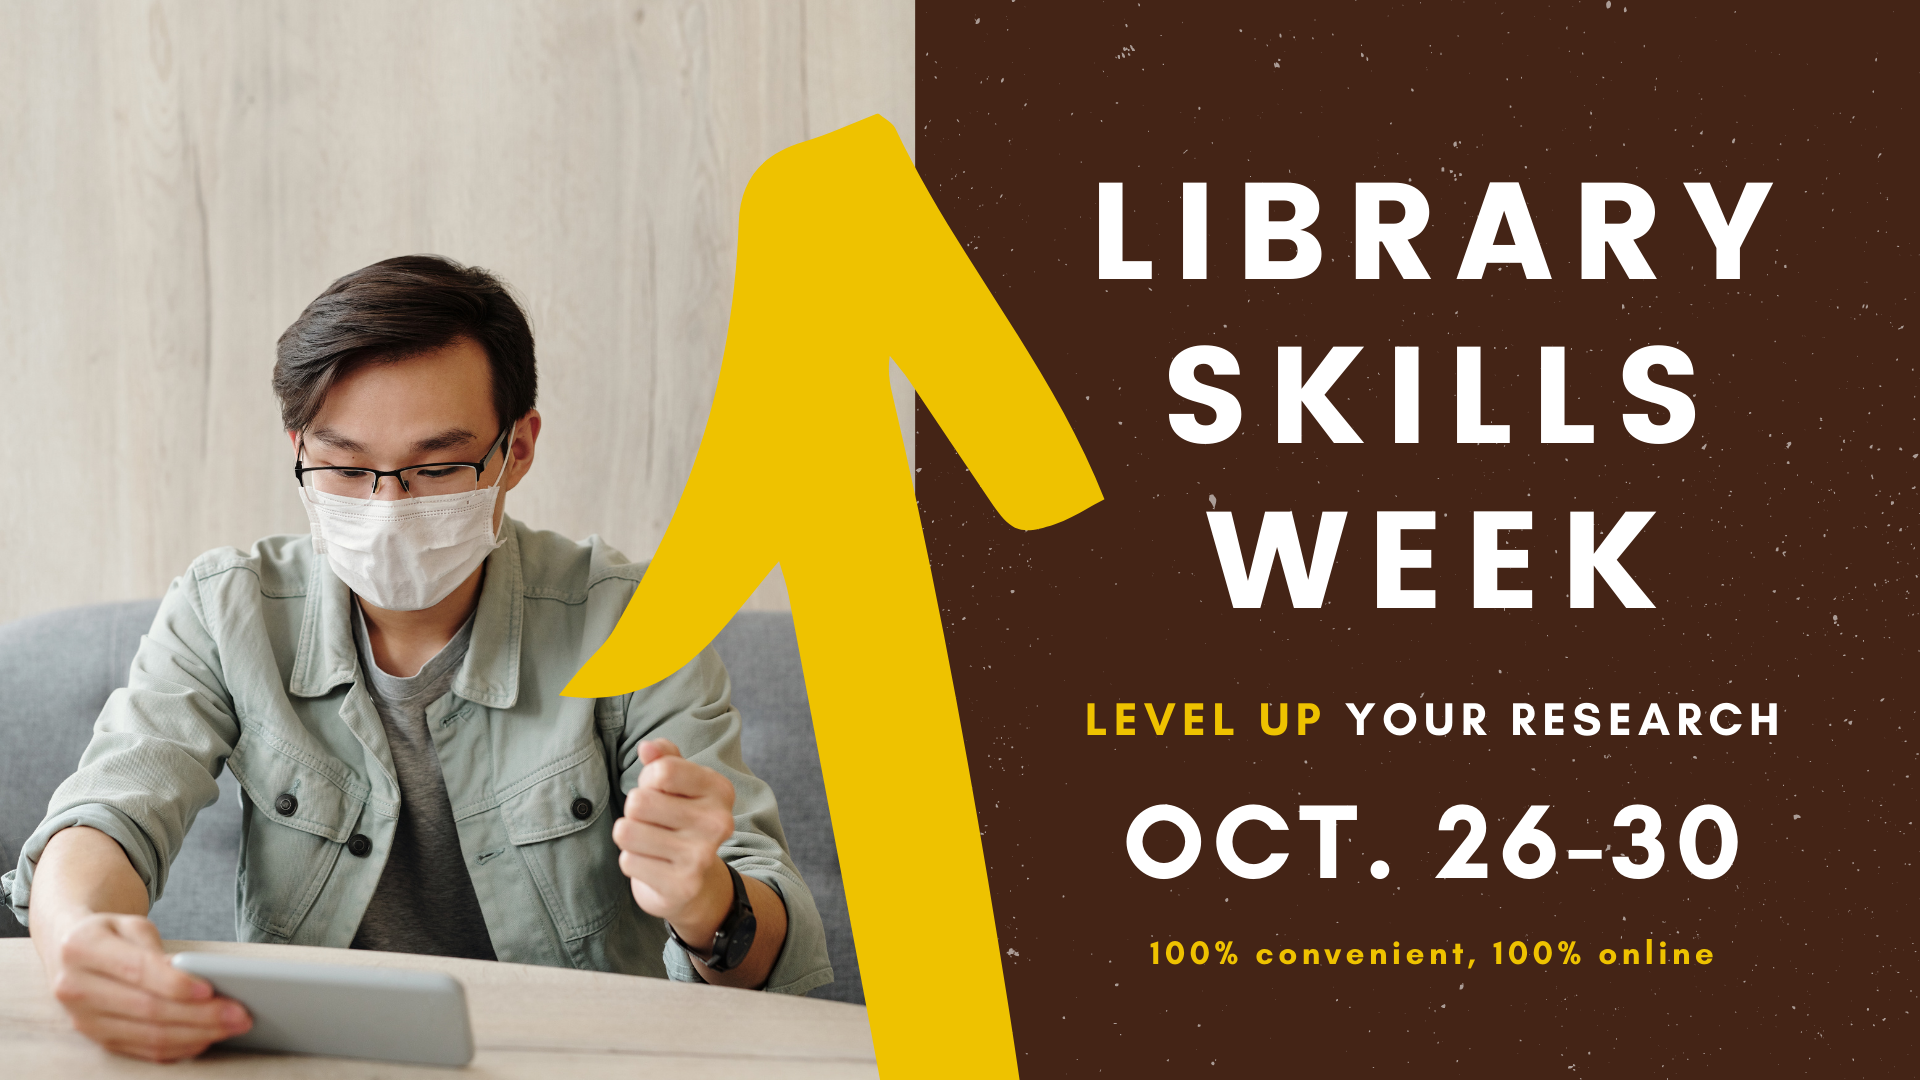 Library Skills Week event on October 26 through 30, 2020